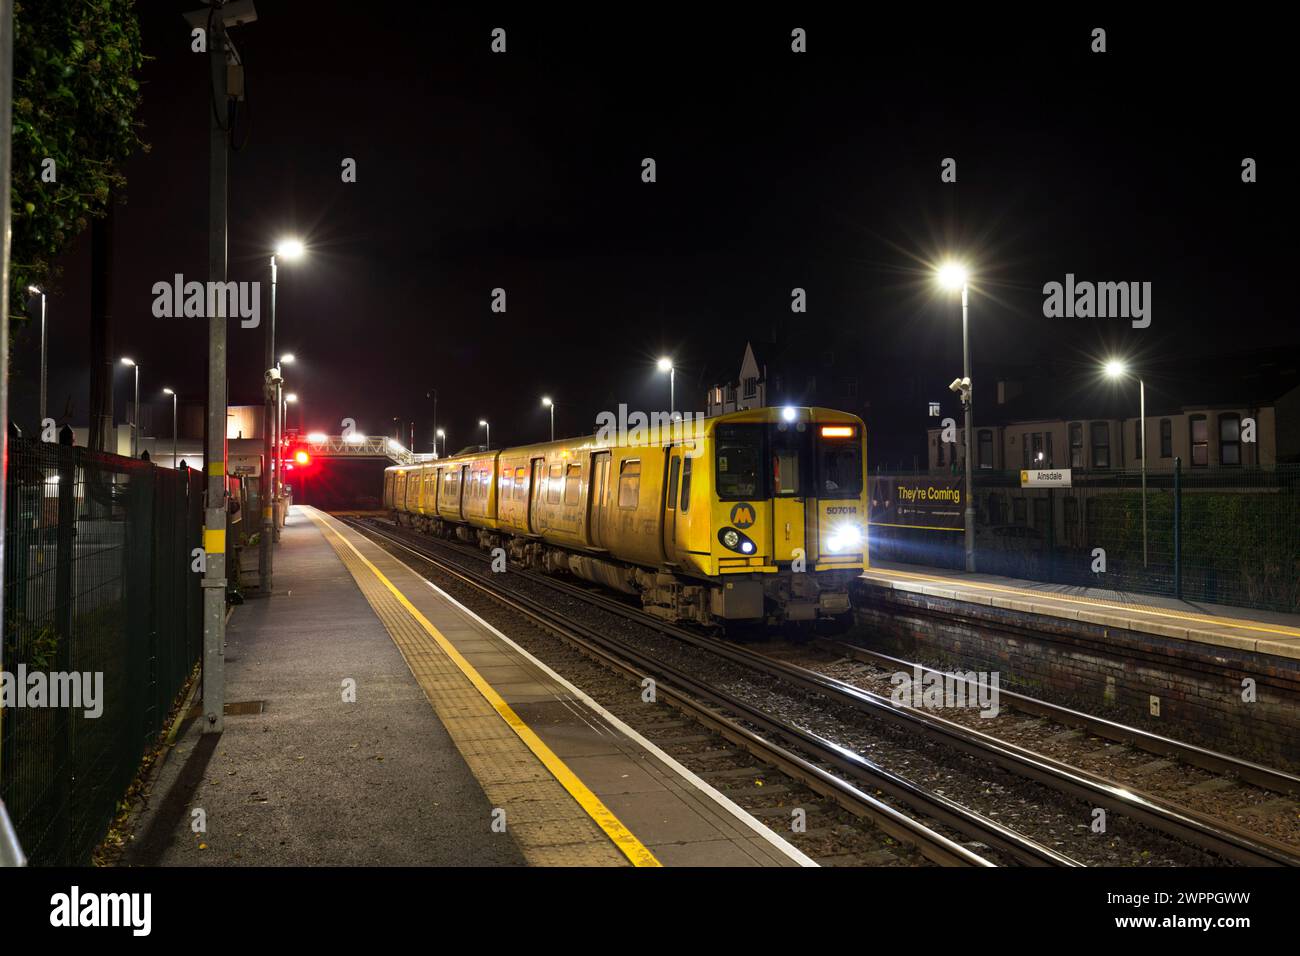 Merseyrail electrics class 507 third rail electric train 507014 at Ainsdale railway station, Southport, UK at night Stock Photo